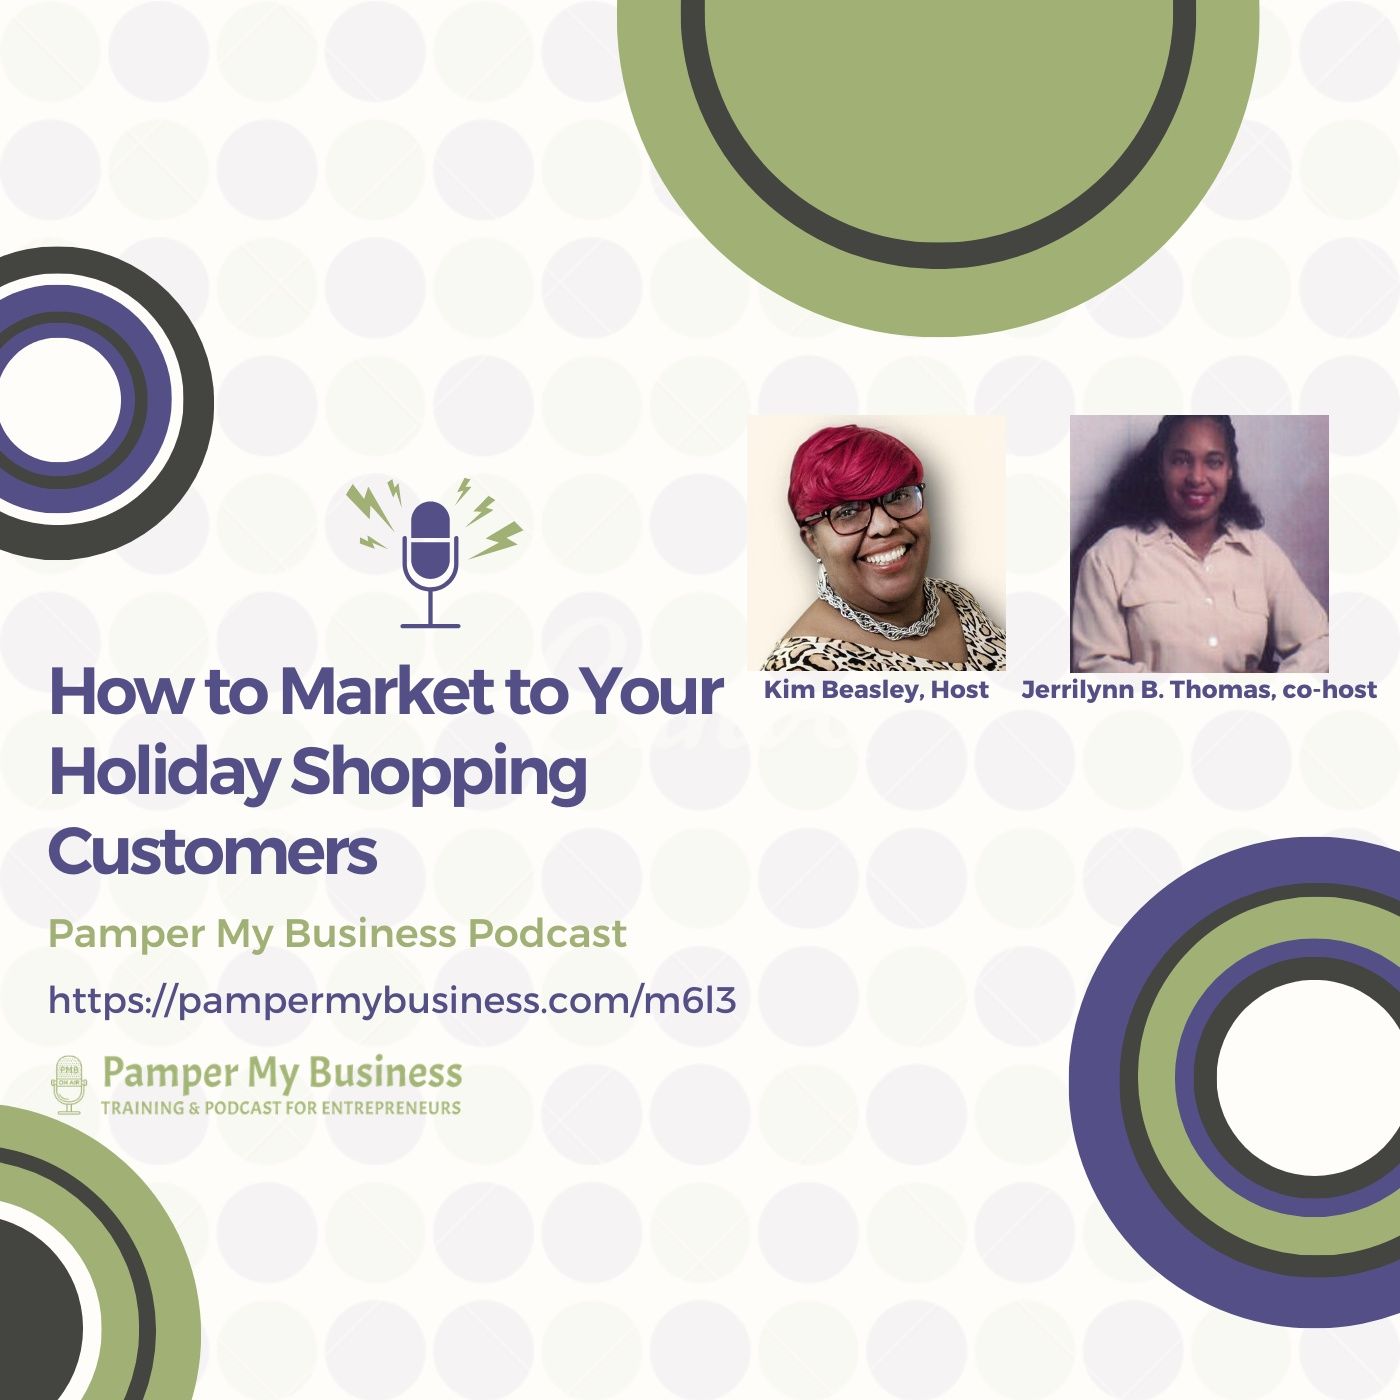 How to Market to Your Holiday Shopping Customers